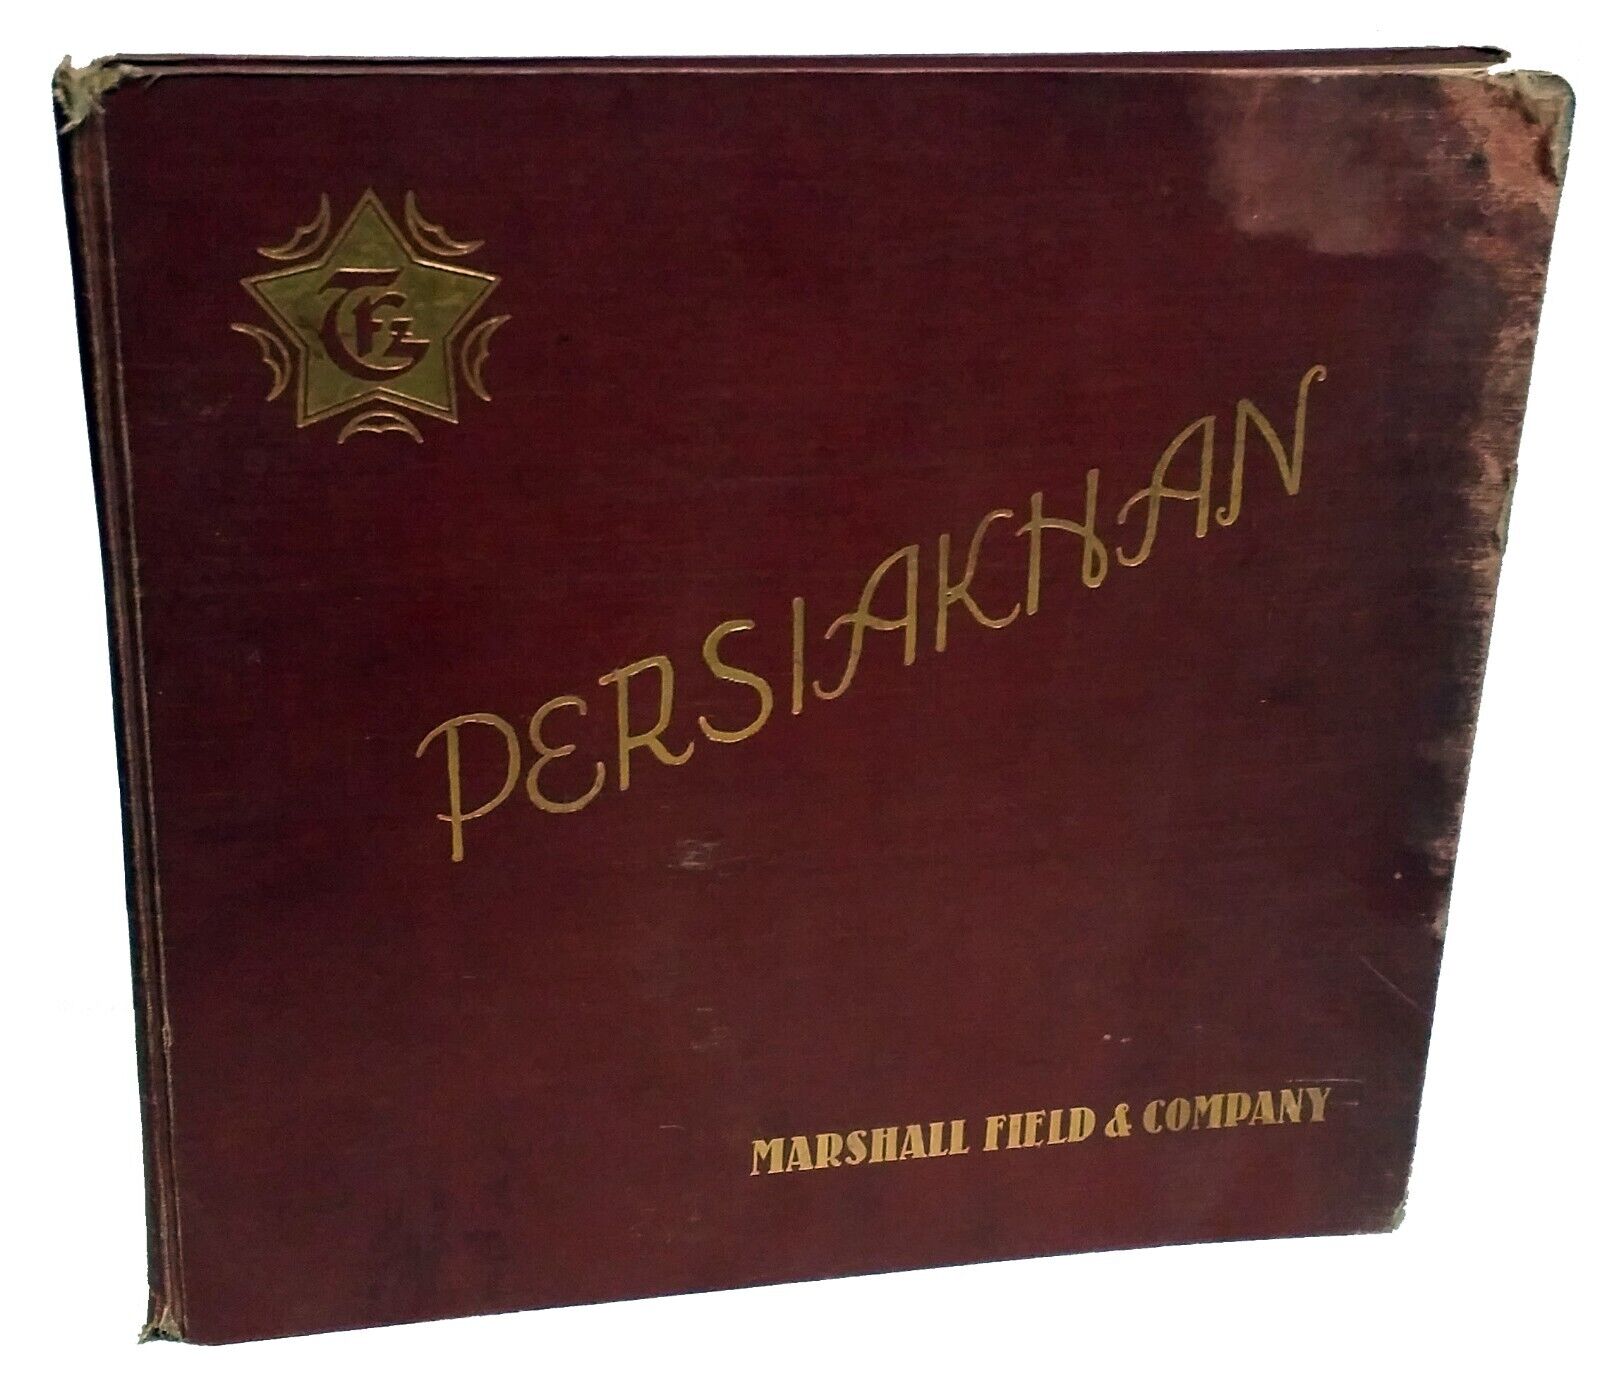 Persiakhan [Marshall Field and Company] 1930s